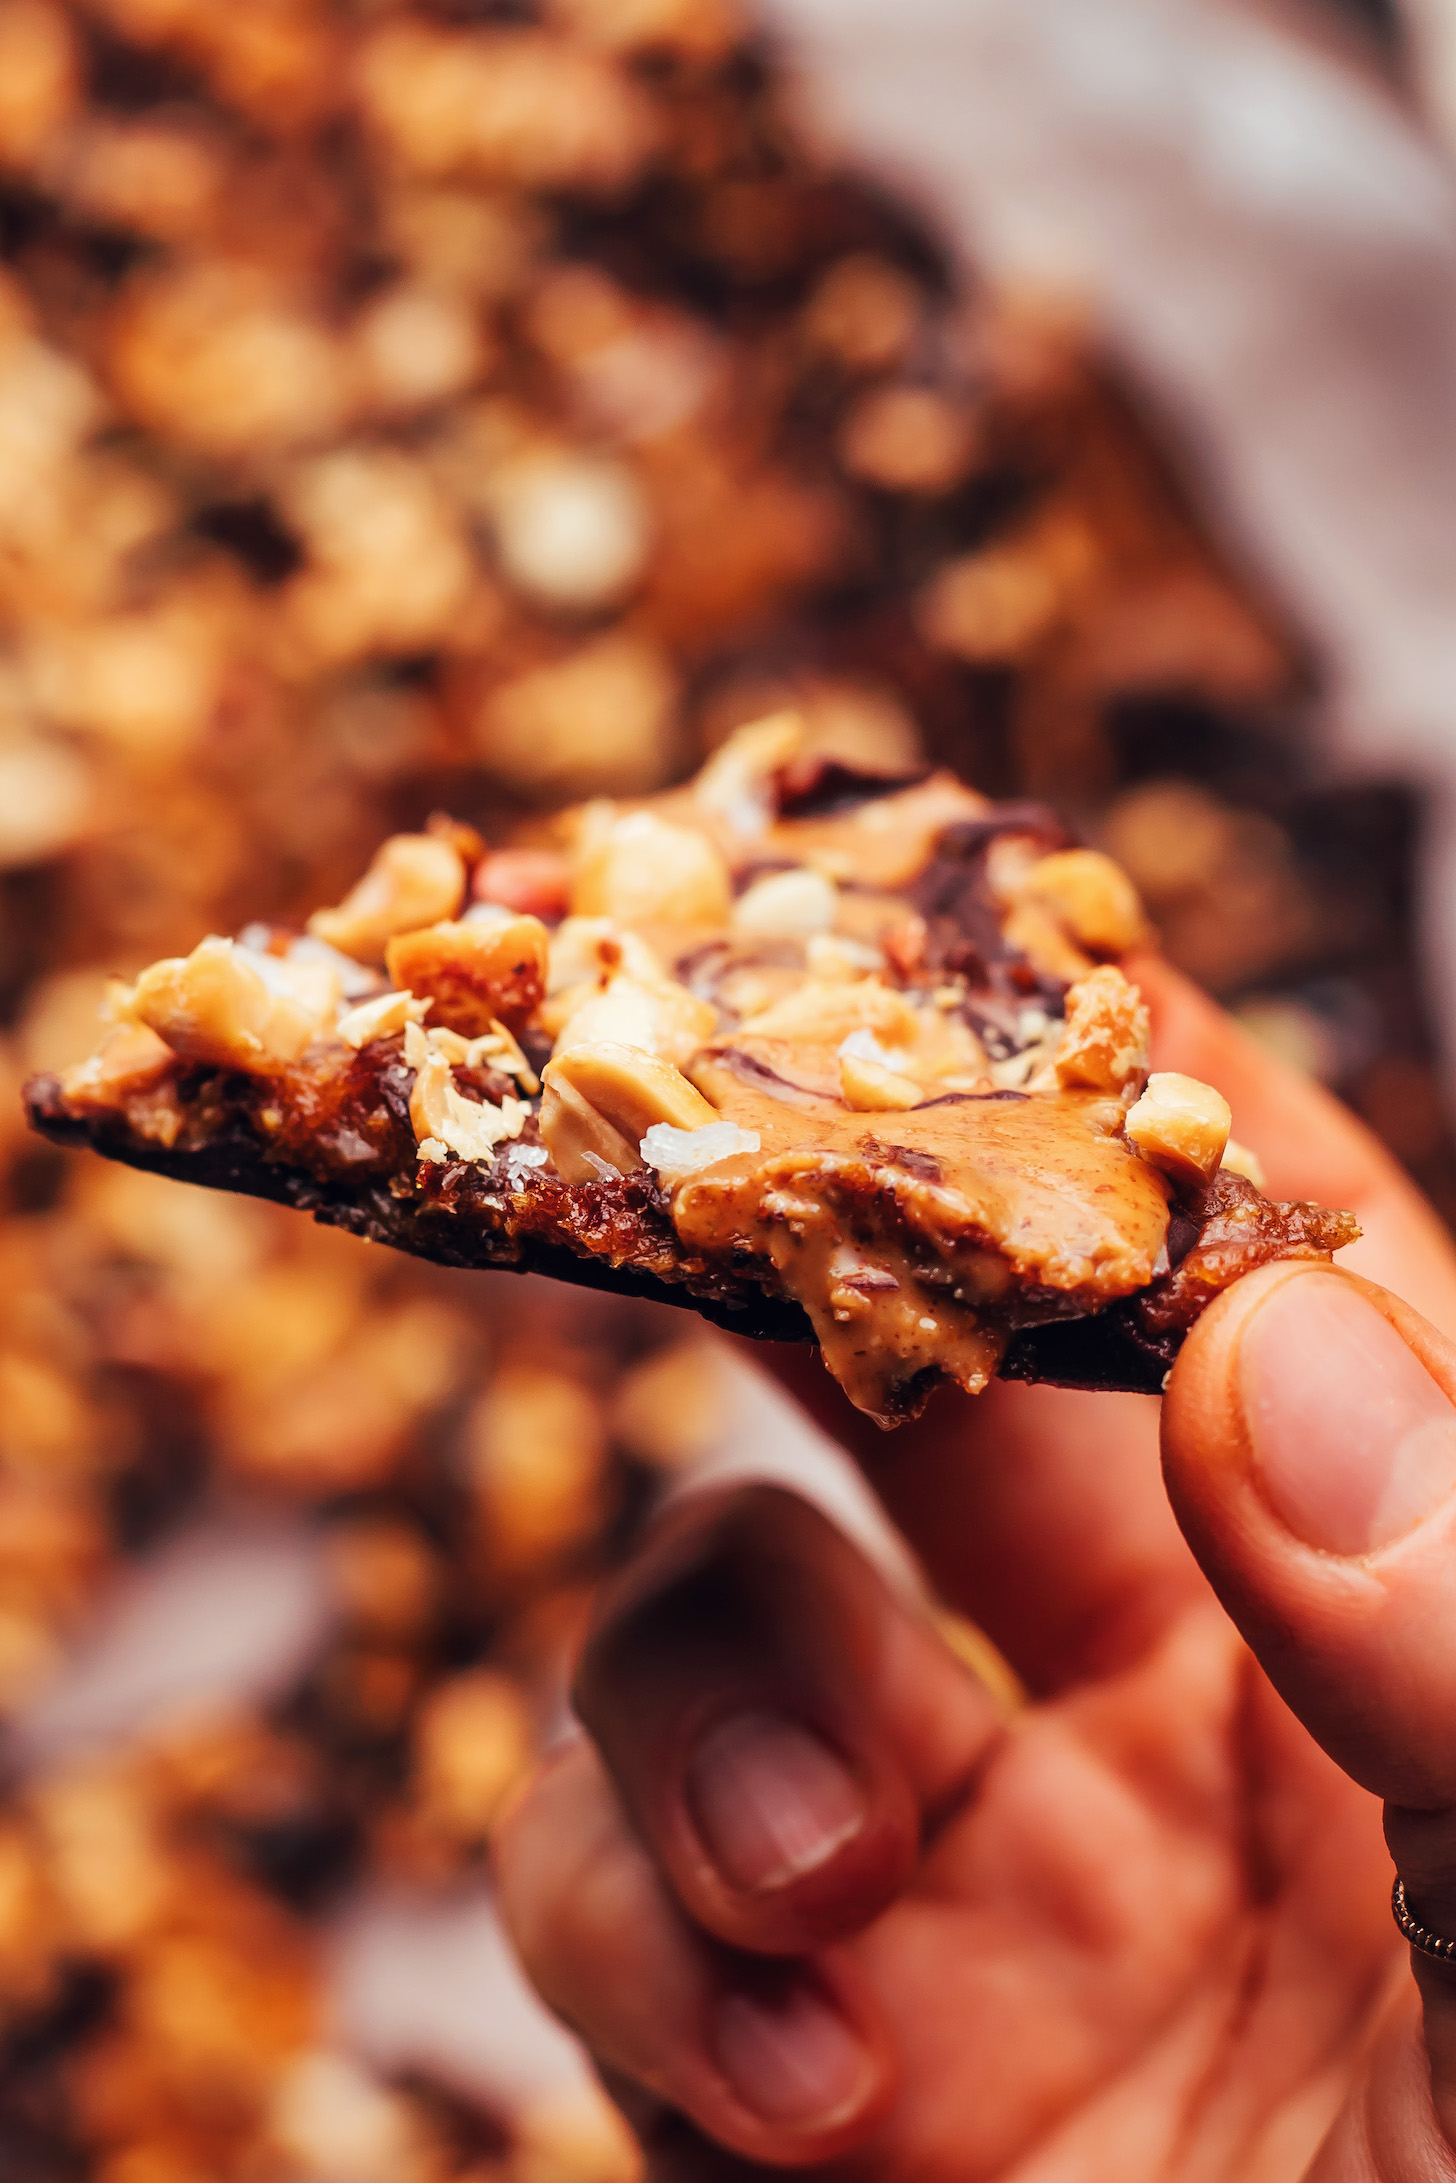 Holding a piece of Snickers chocolate bark